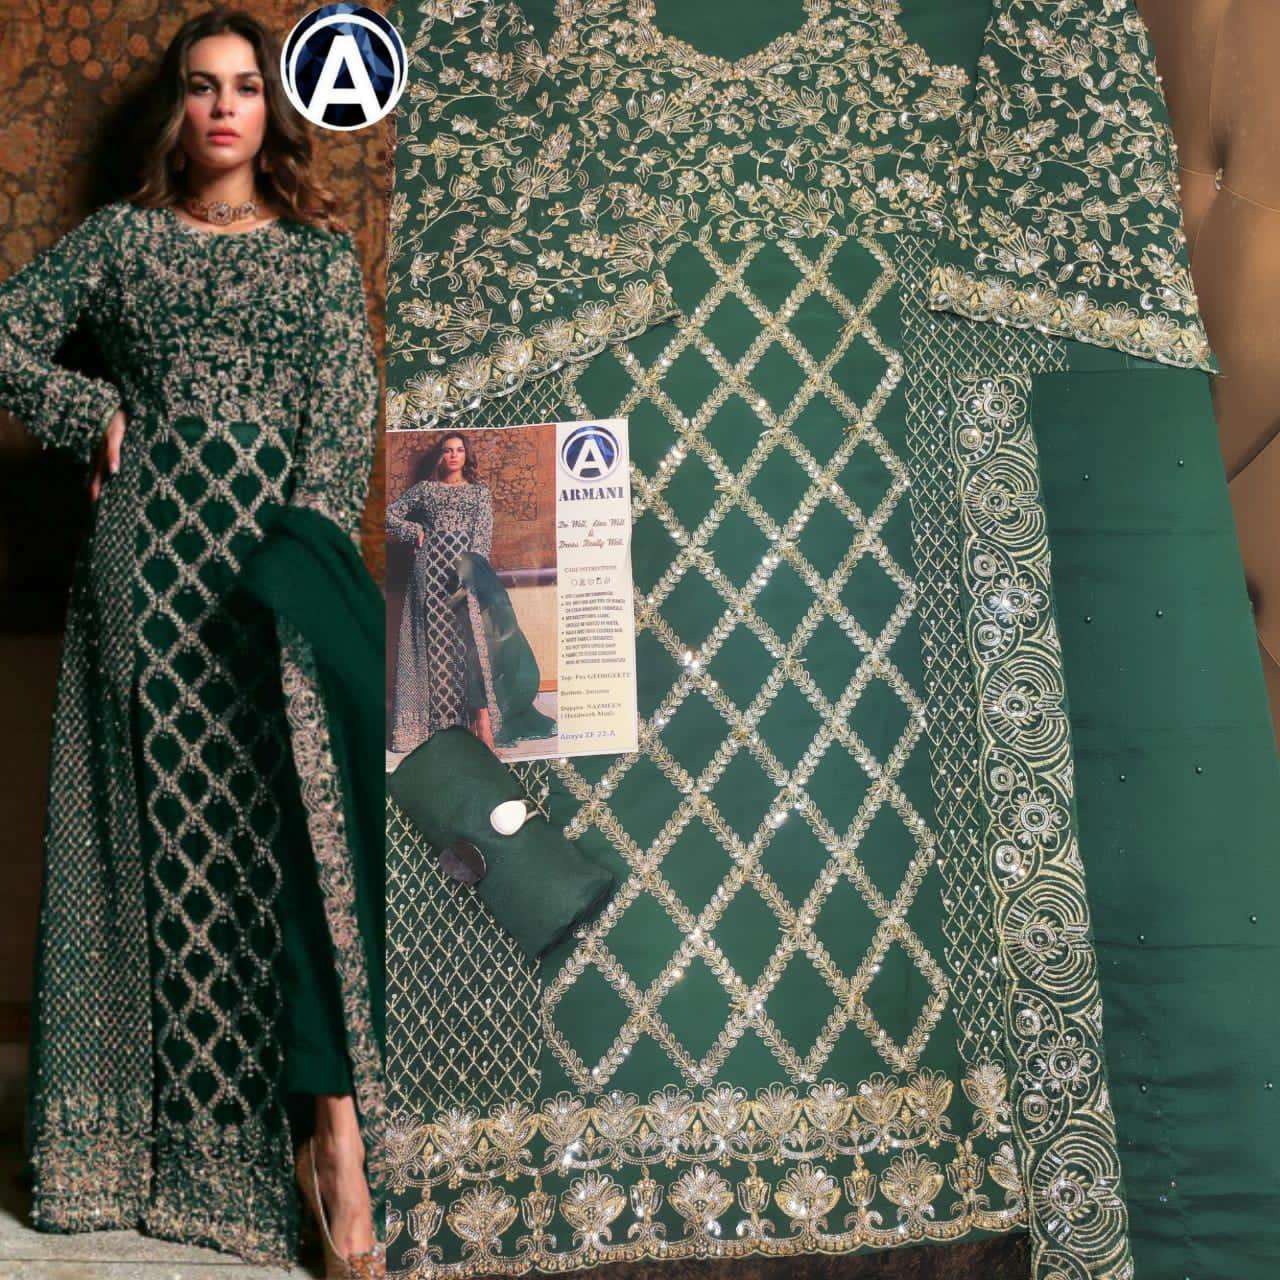 RIMISHA 06 BY ARMANI 22 TO 22-D SERIES Z DESIGNER SUITS BEAUTIFUL FANCY COLORFUL STYLISH PARTY WEAR & OCCASIONAL WEAR FAUX GEORGETTE HEAVY EMBROIDERED DRESSES AT WHOLESALE PRICE